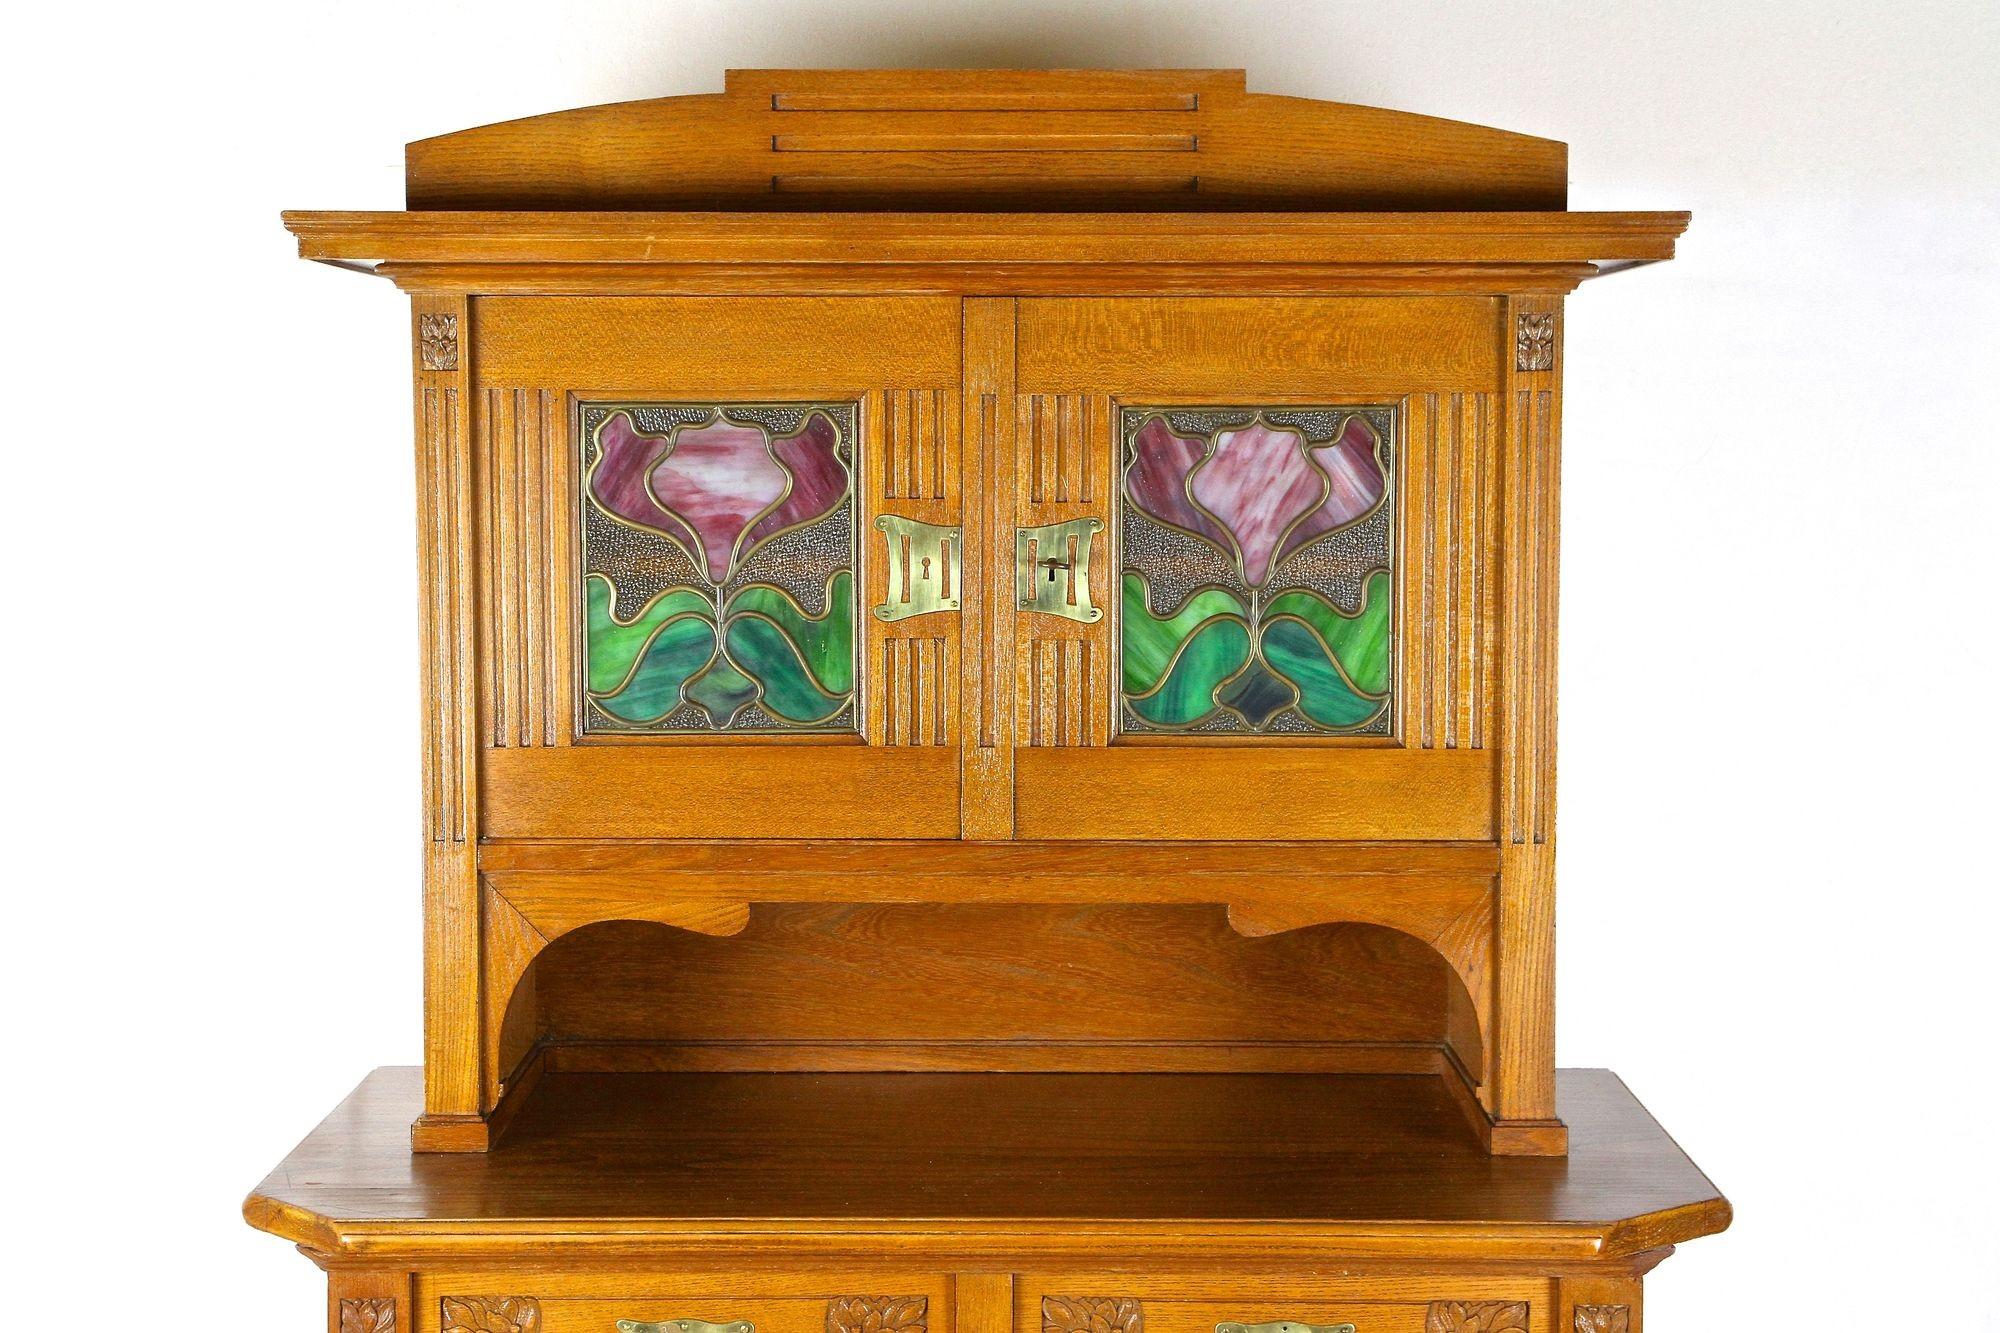 Austrian Art Nouveau Oakwood Cabinet/ Buffet With Tiffany Style Glass Inlays, AT ca 1910 For Sale